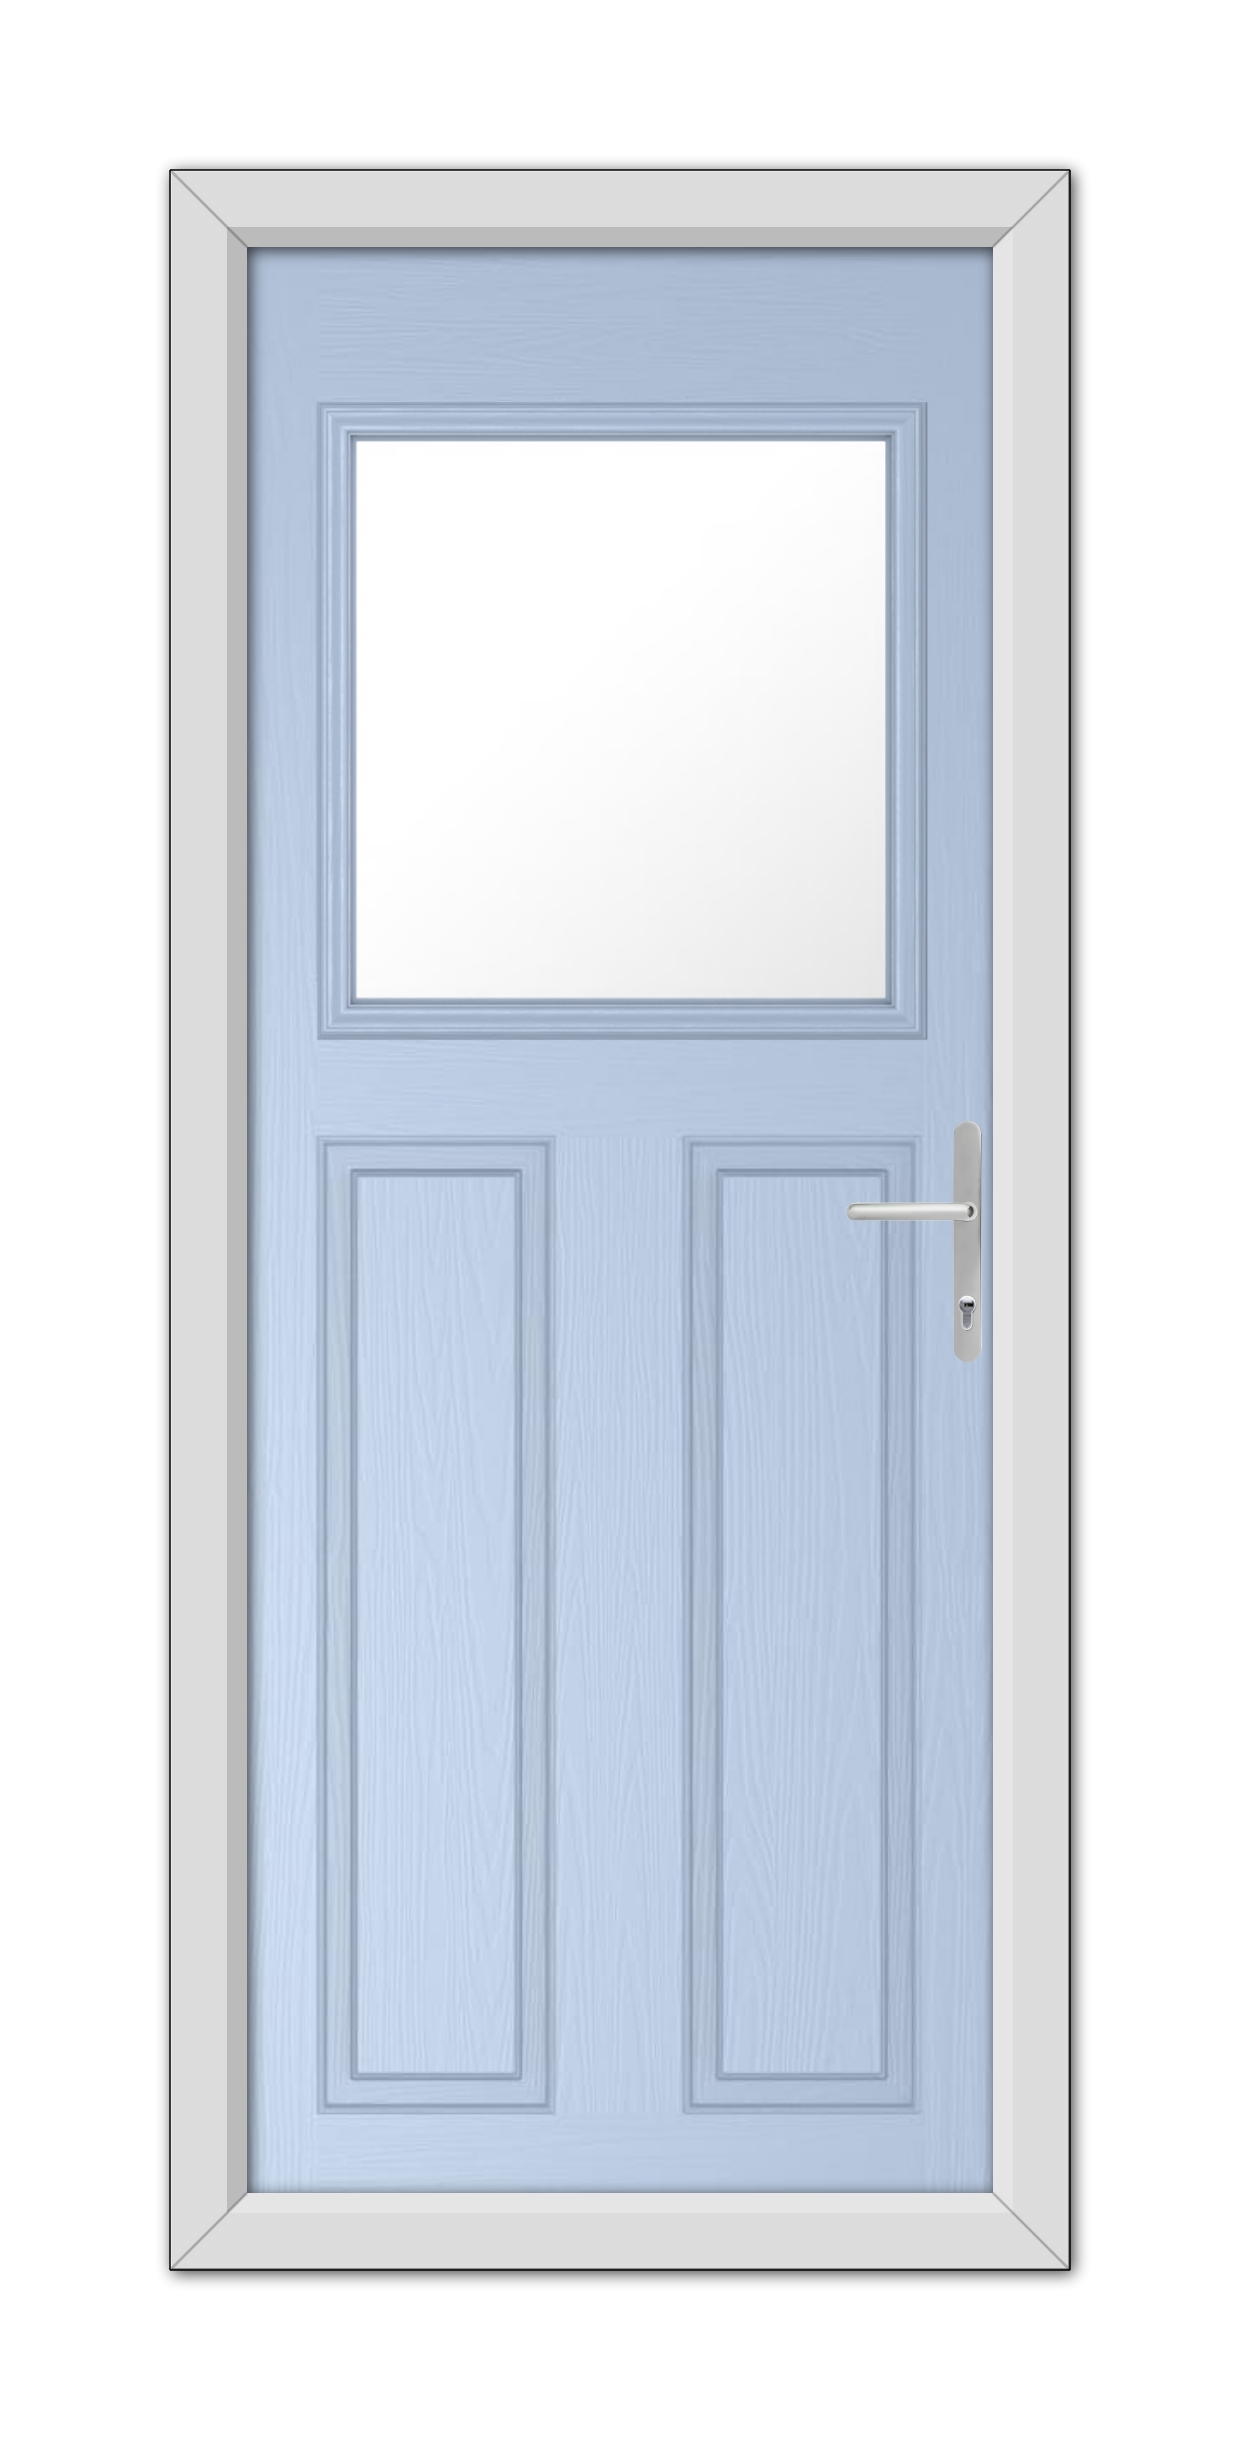 A Duck Egg Blue Axwell Composite Door 48mm Timber Core with a small rectangular window at the top, framed in white, featuring a modern handle on the right side.